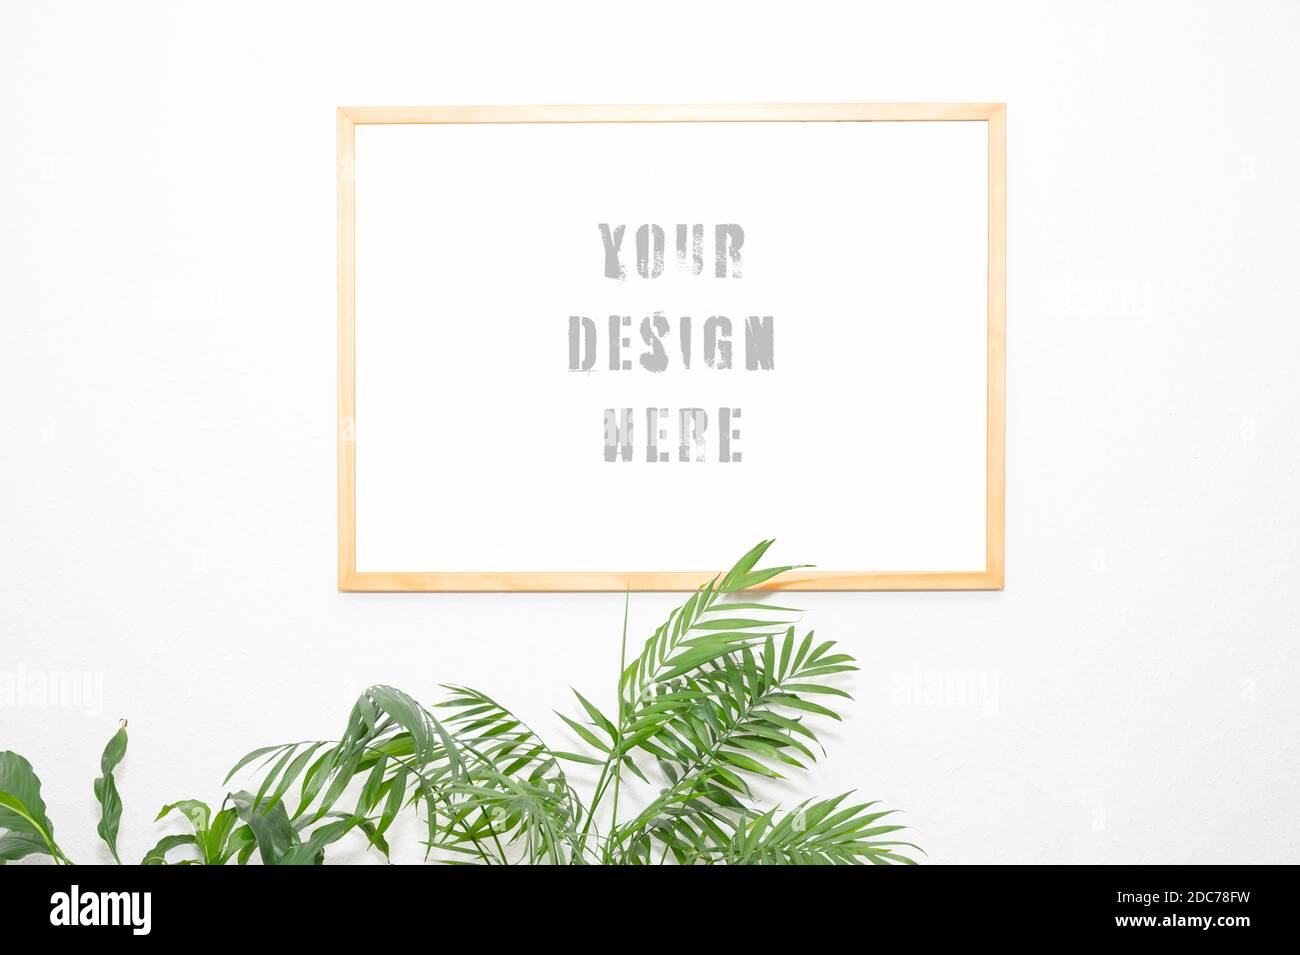 real wood picture frame mockup on a white wall with plants projecting into the picture from below, real photo as design template Stock Photo